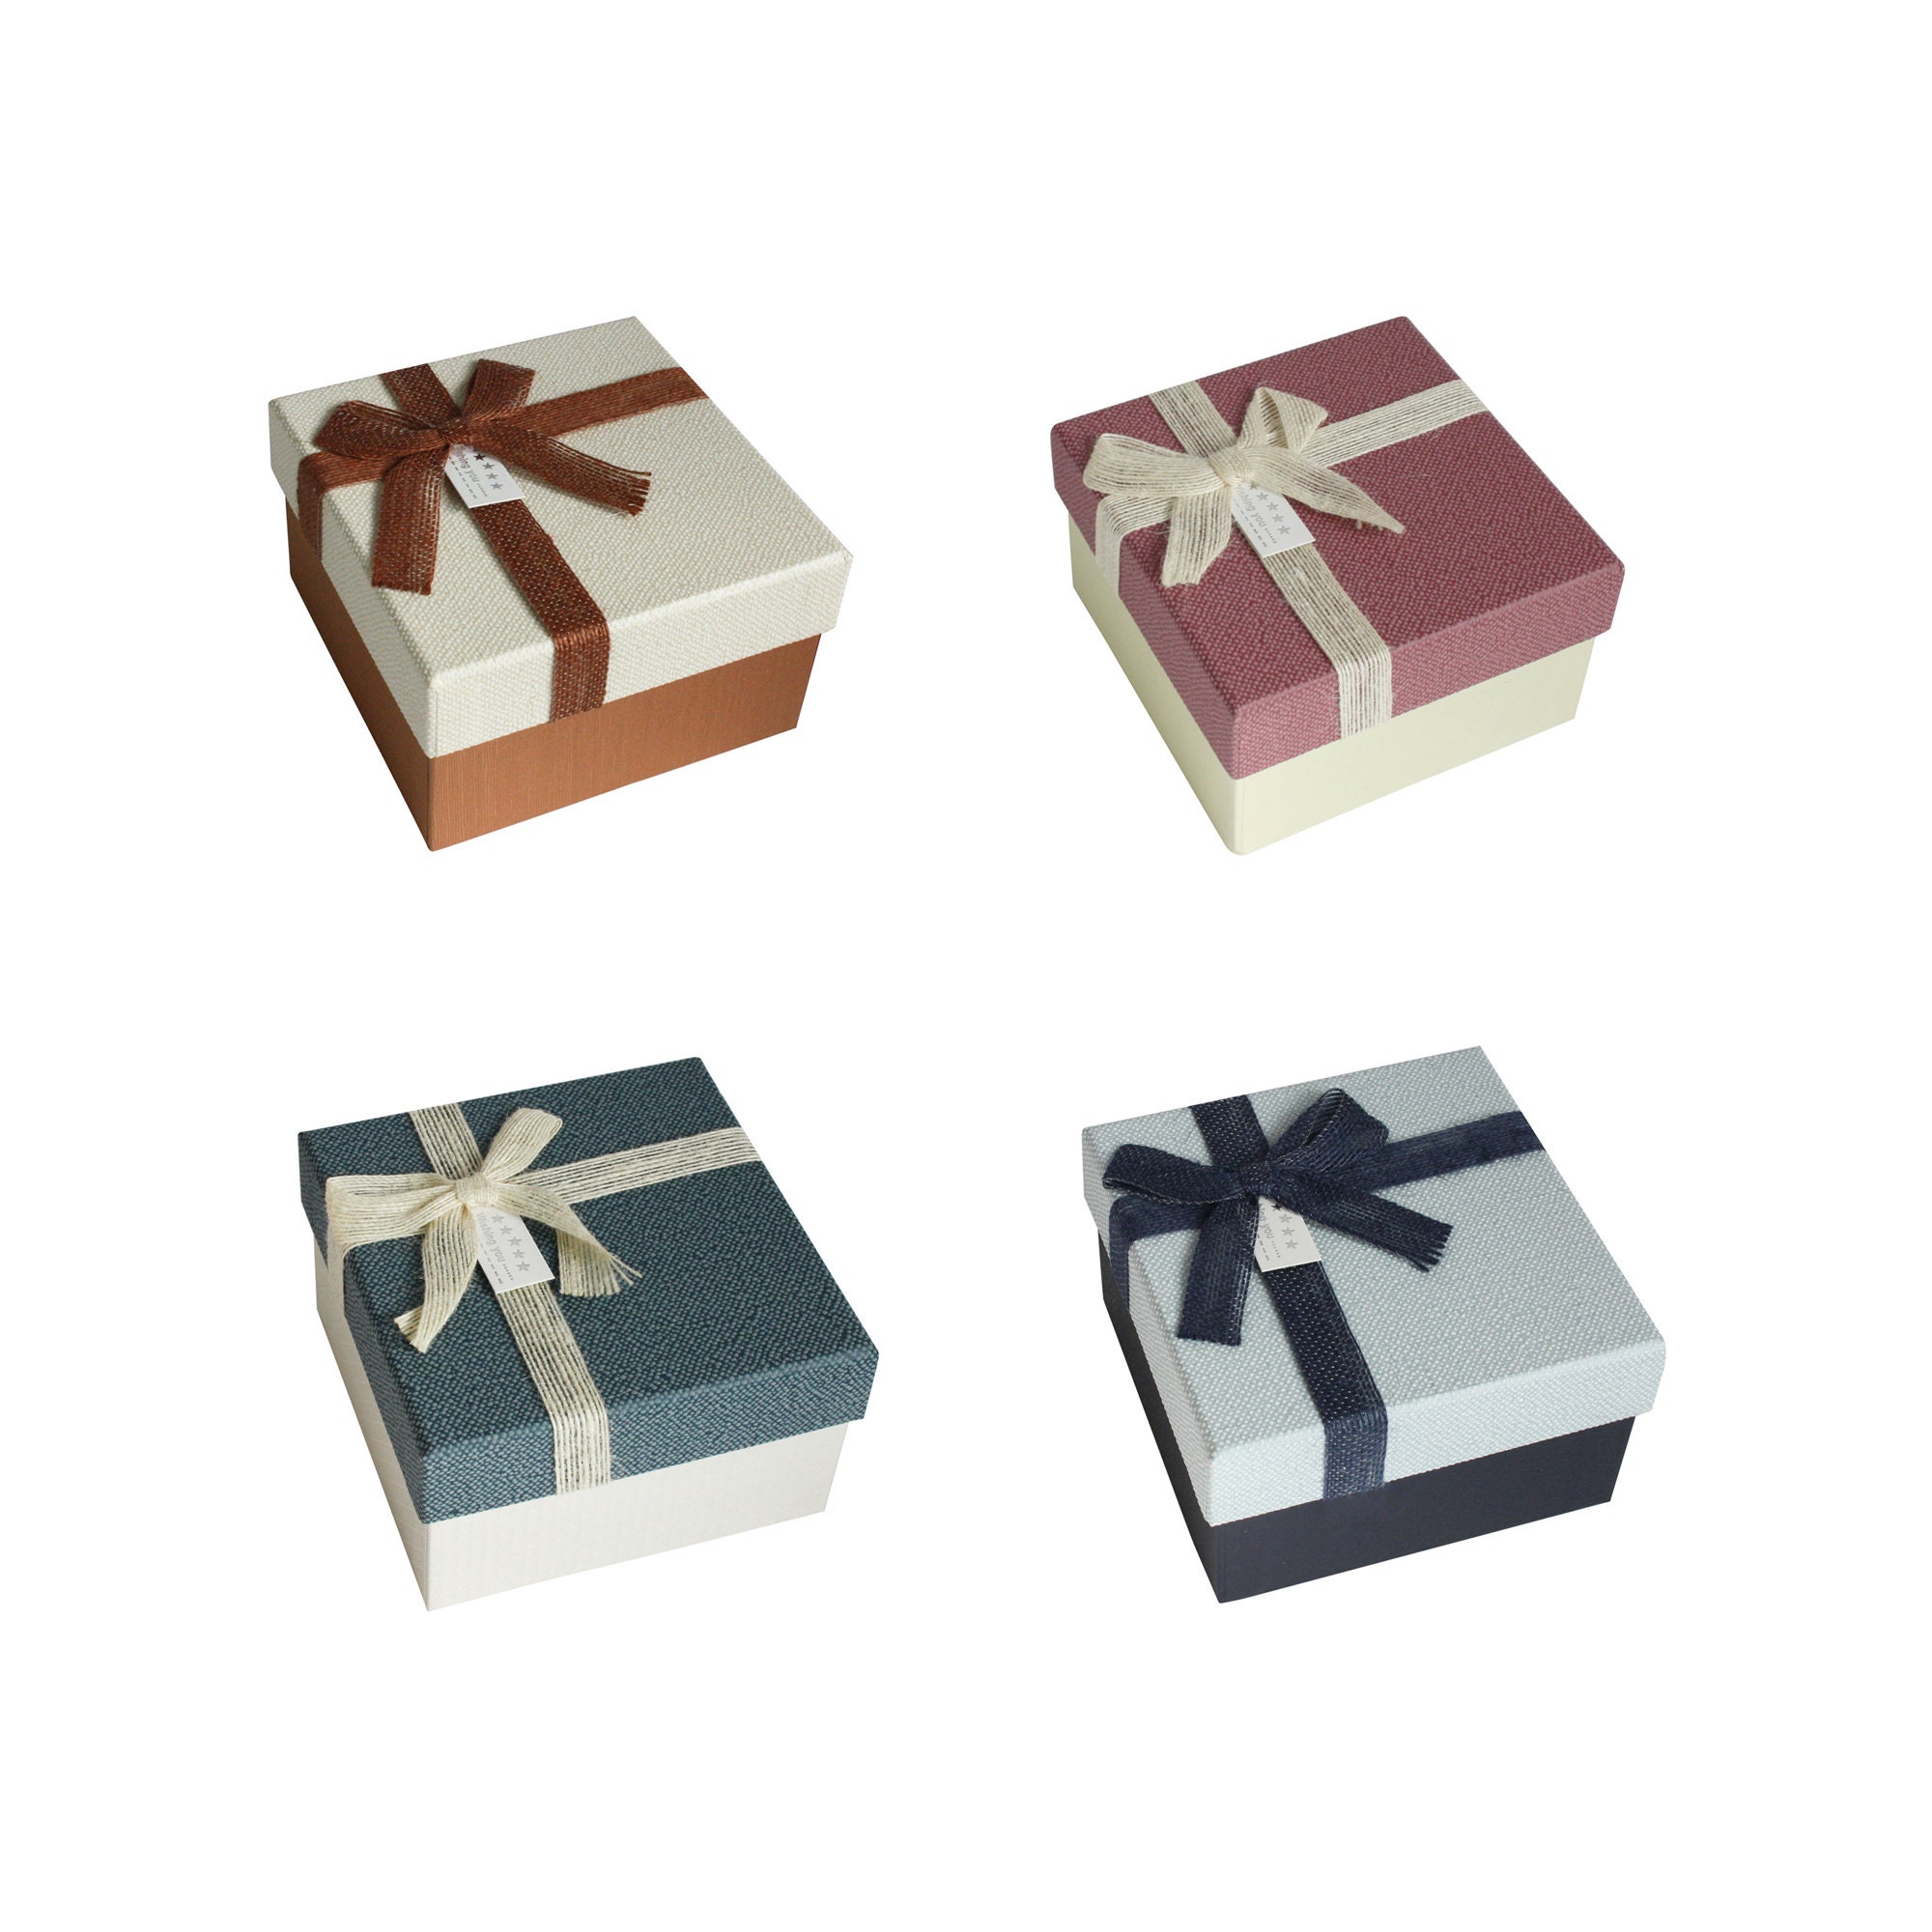 using ribbon for gift wrapping - RibbonBuy